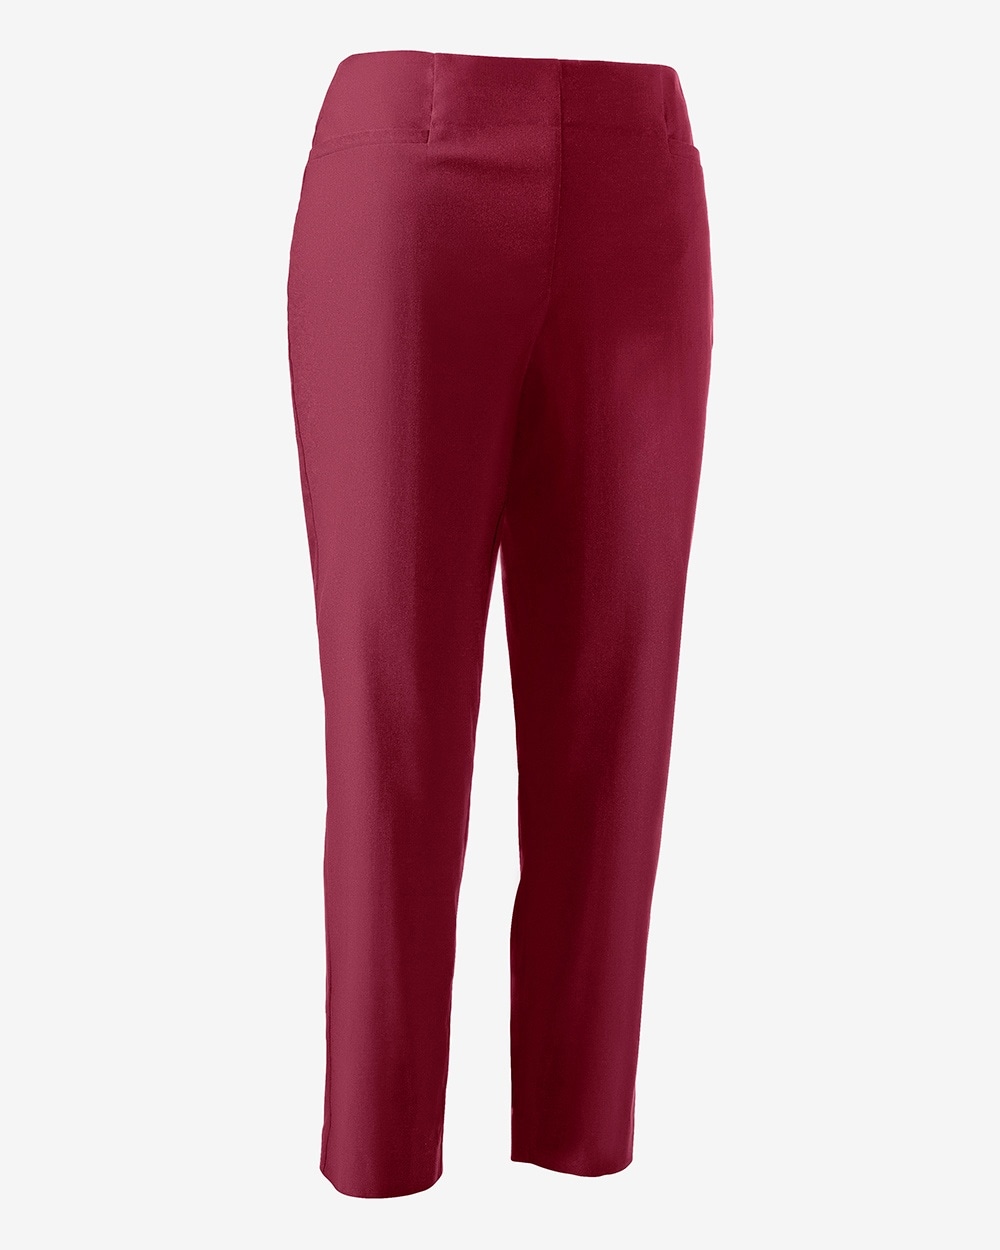 Perfect Stretch Marveluxe Slim-Leg Ankle Pants